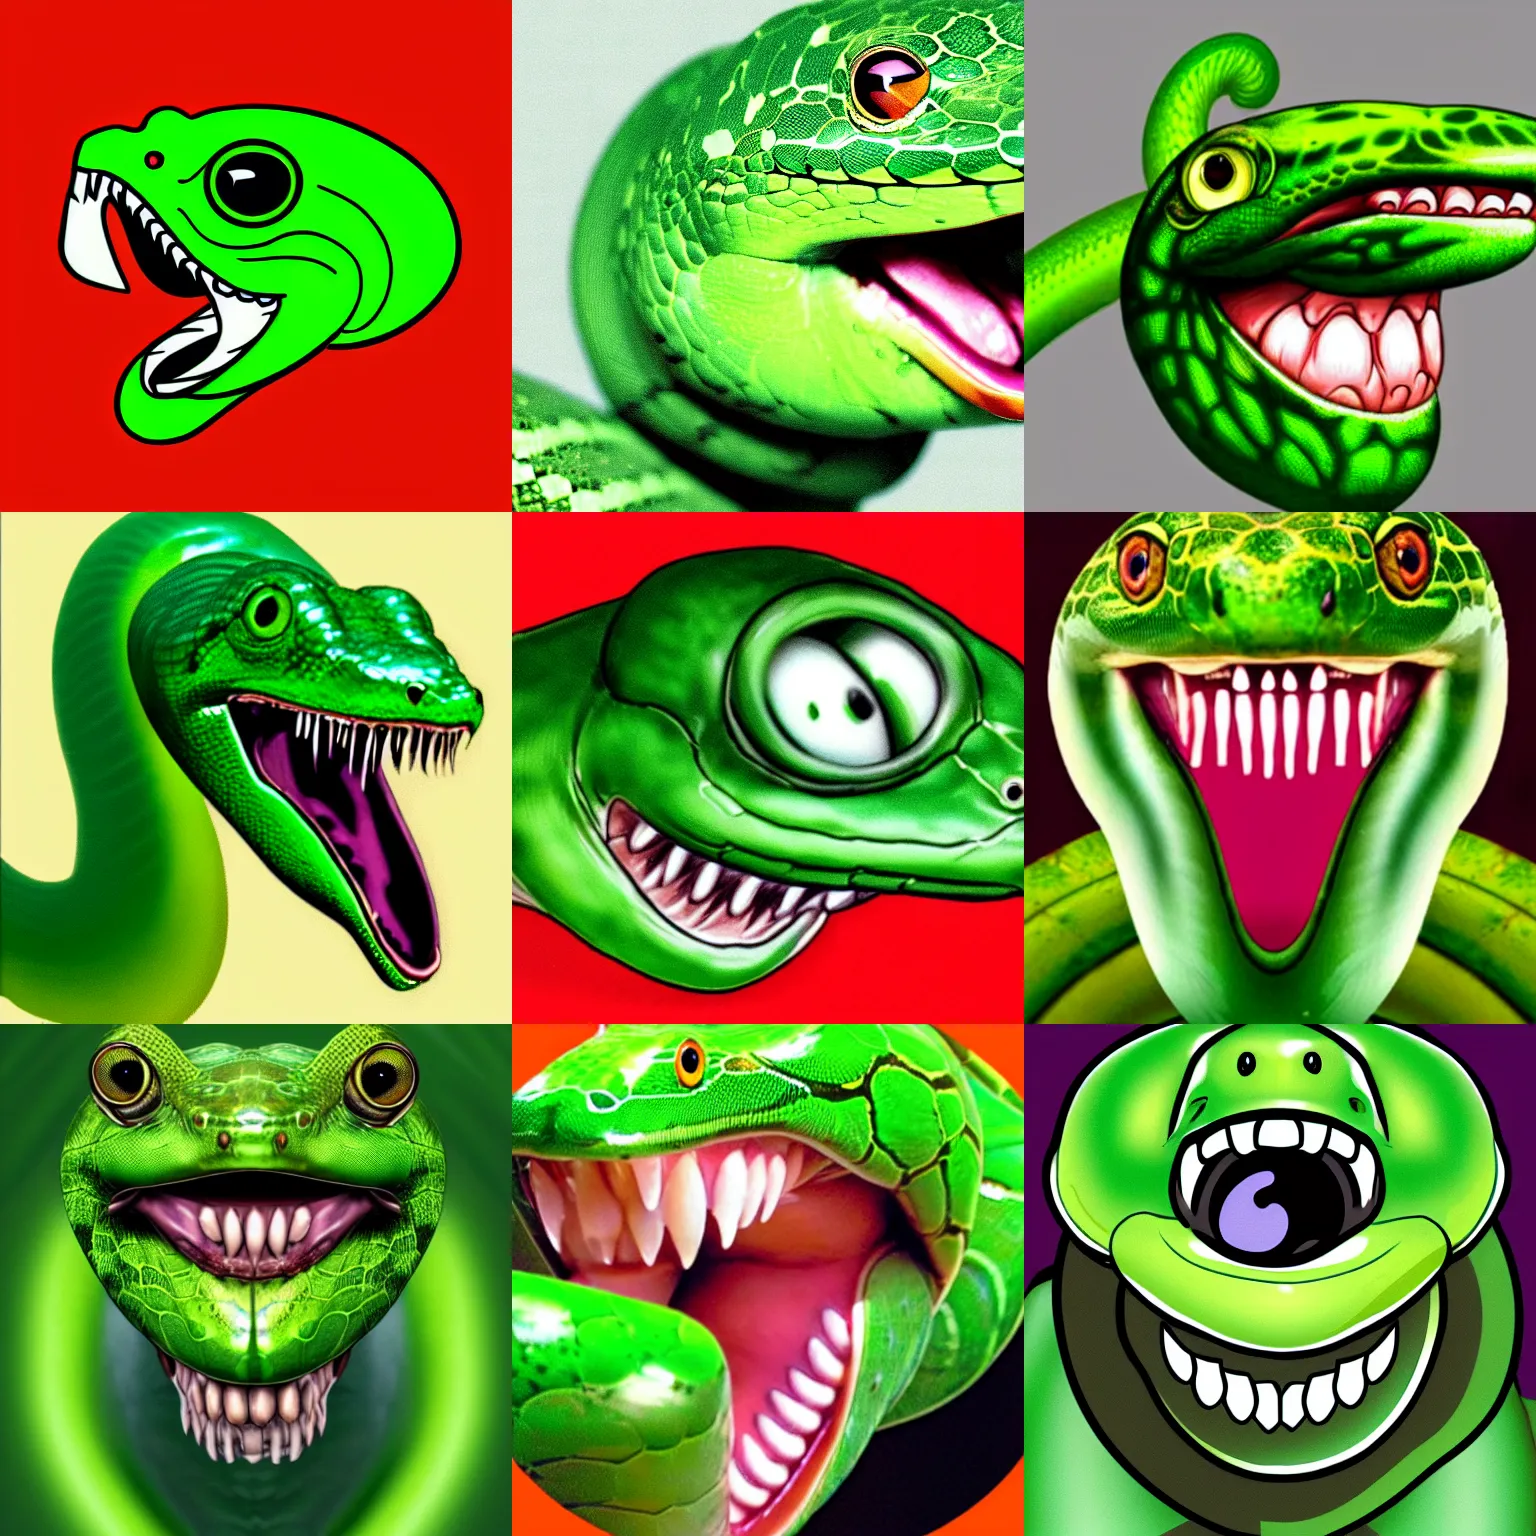 Prompt: Profile picture of green snake with comically large head looking right, portrait, computer drawing, large fangs, open mouth, large eyes